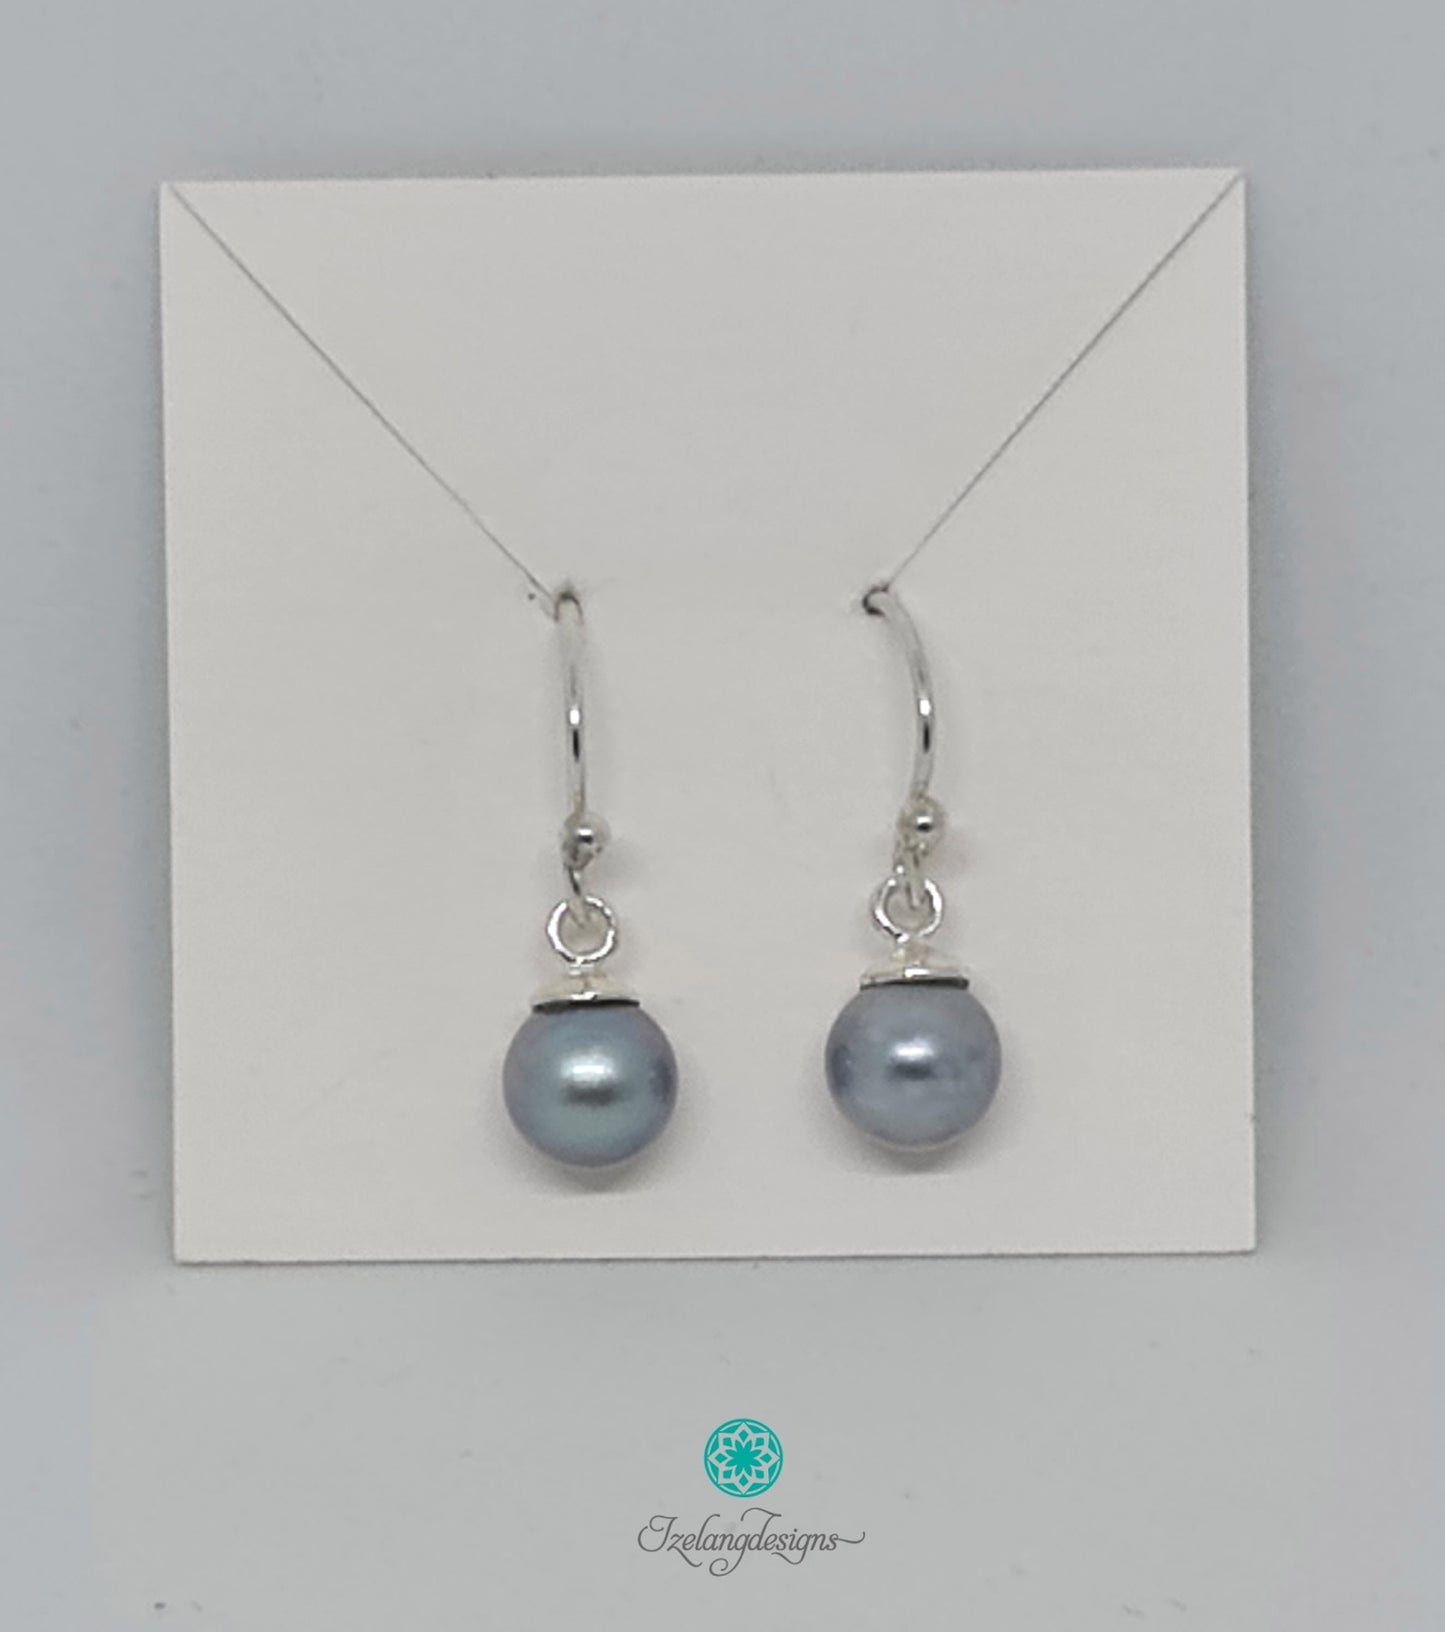 6.5-7mm Light Grey Round Akoya Pearls with Plain Top Bail and Ear Hook in 925 Sterling Silver-EGM088